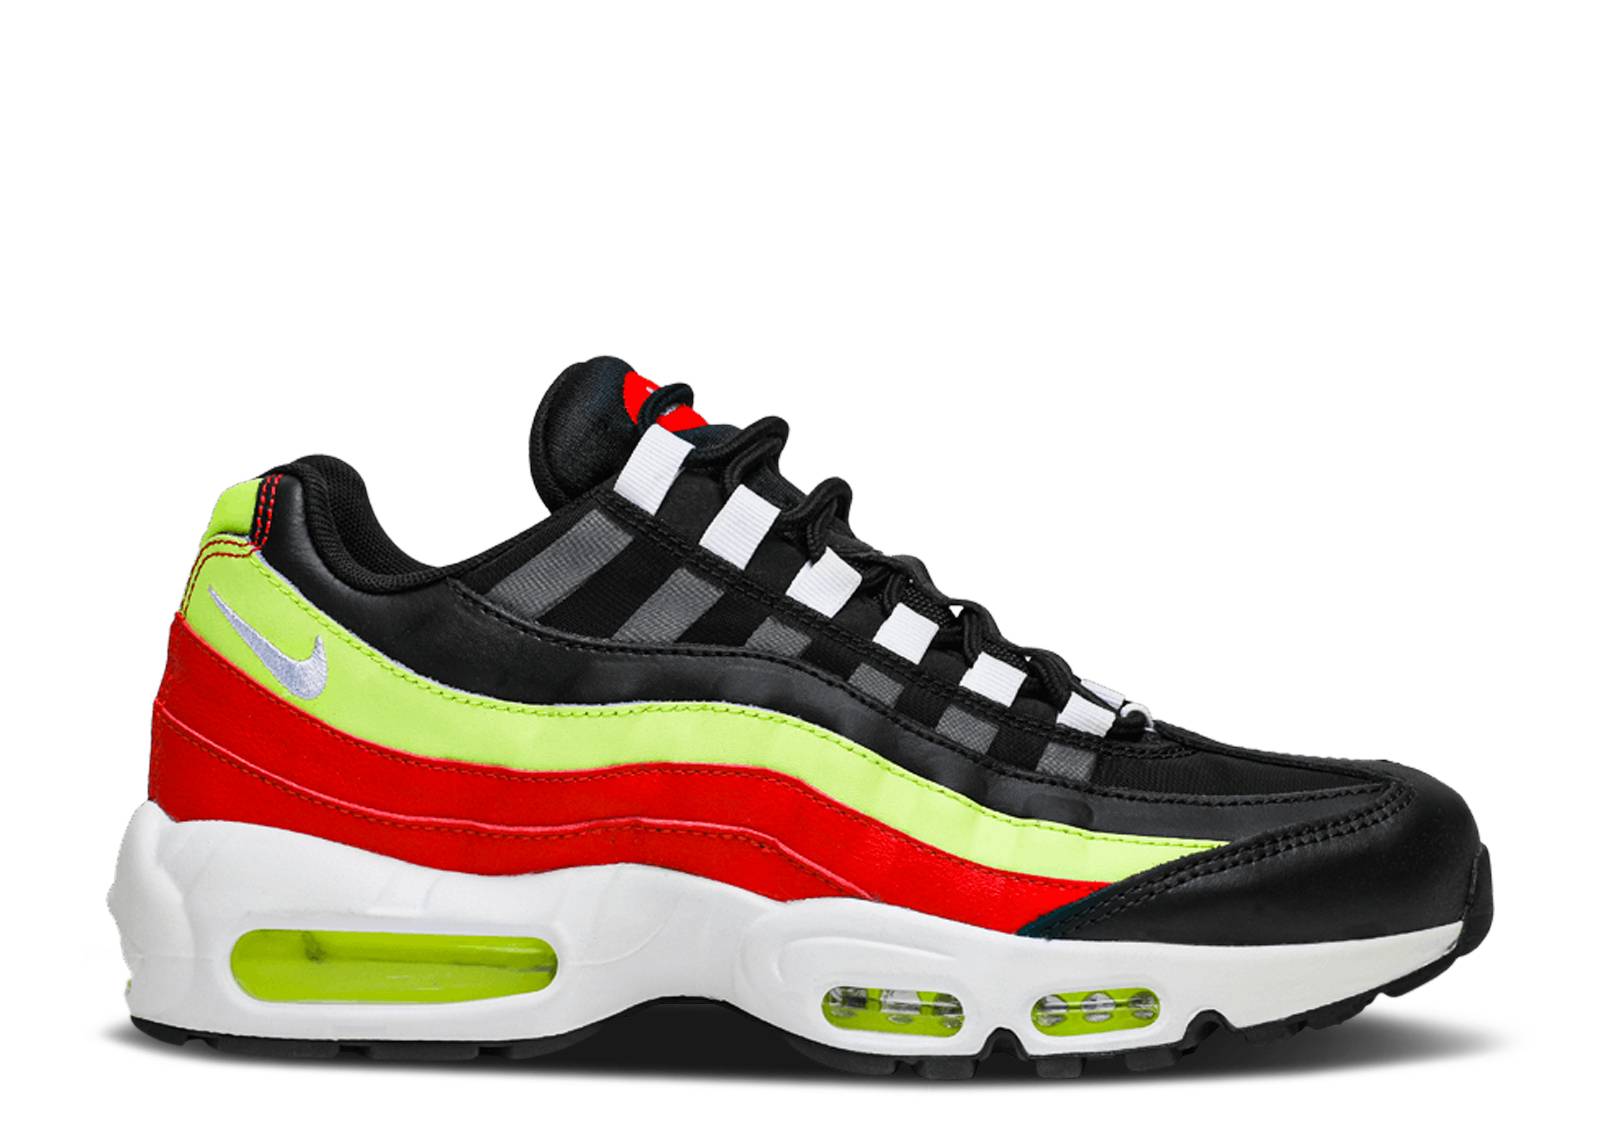 Wmns Air Max 95 'Neon Red'